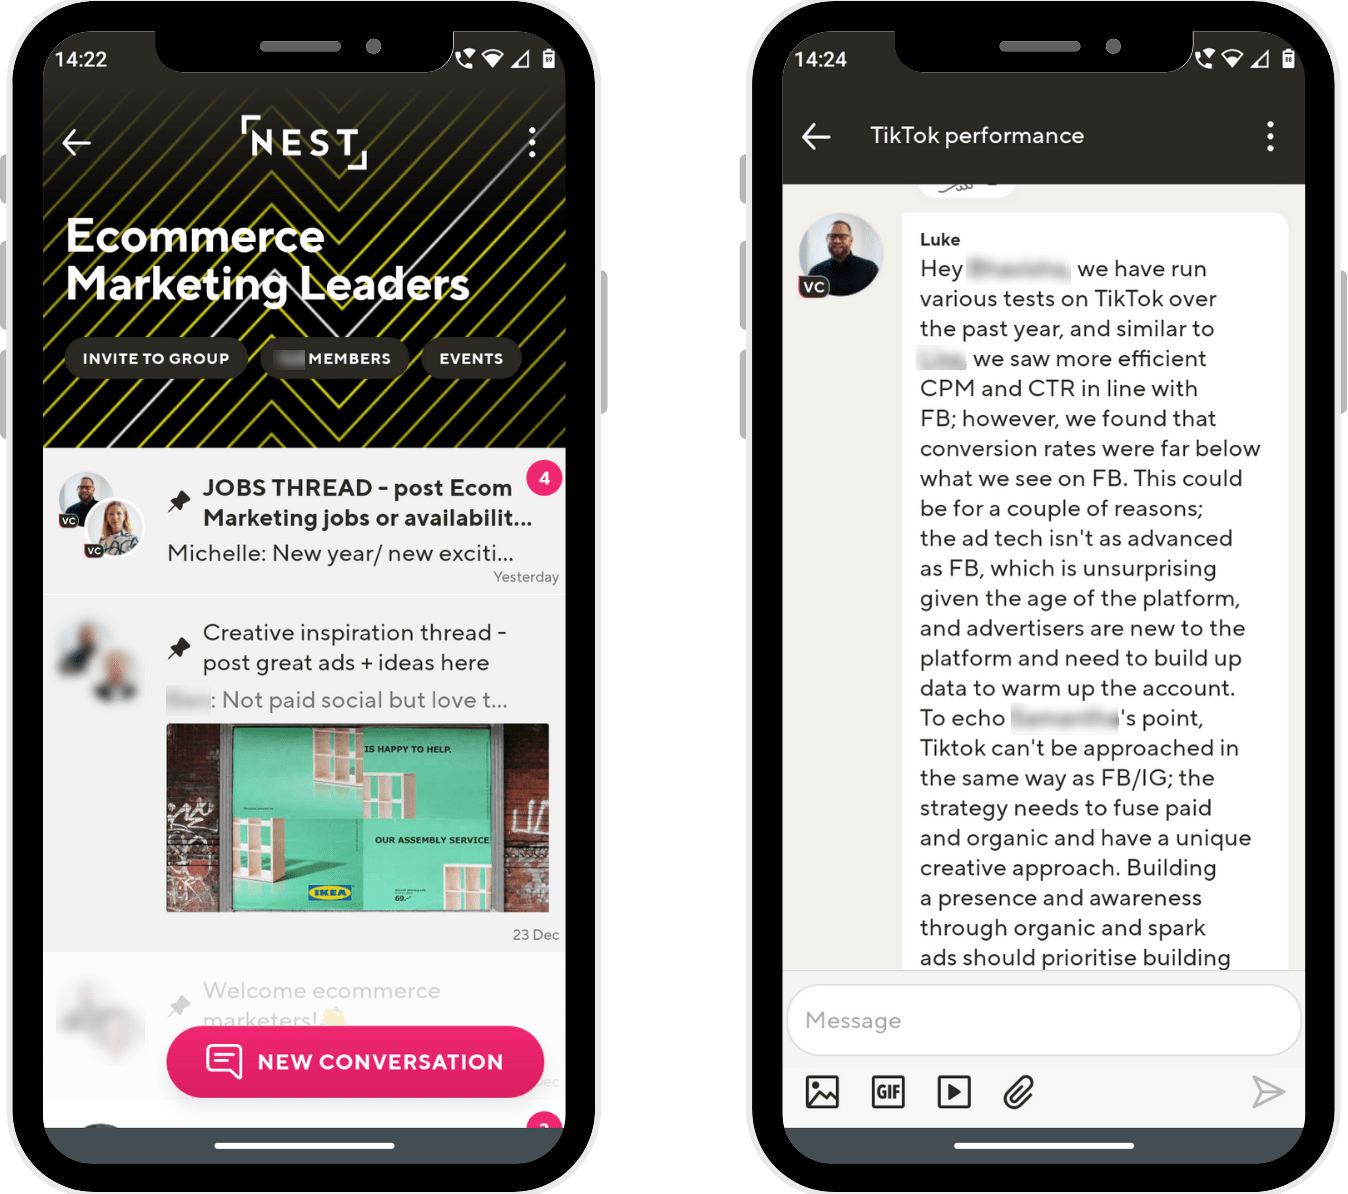 Nest created a community of practice on Guild to share expertise in ecommerce marketing 